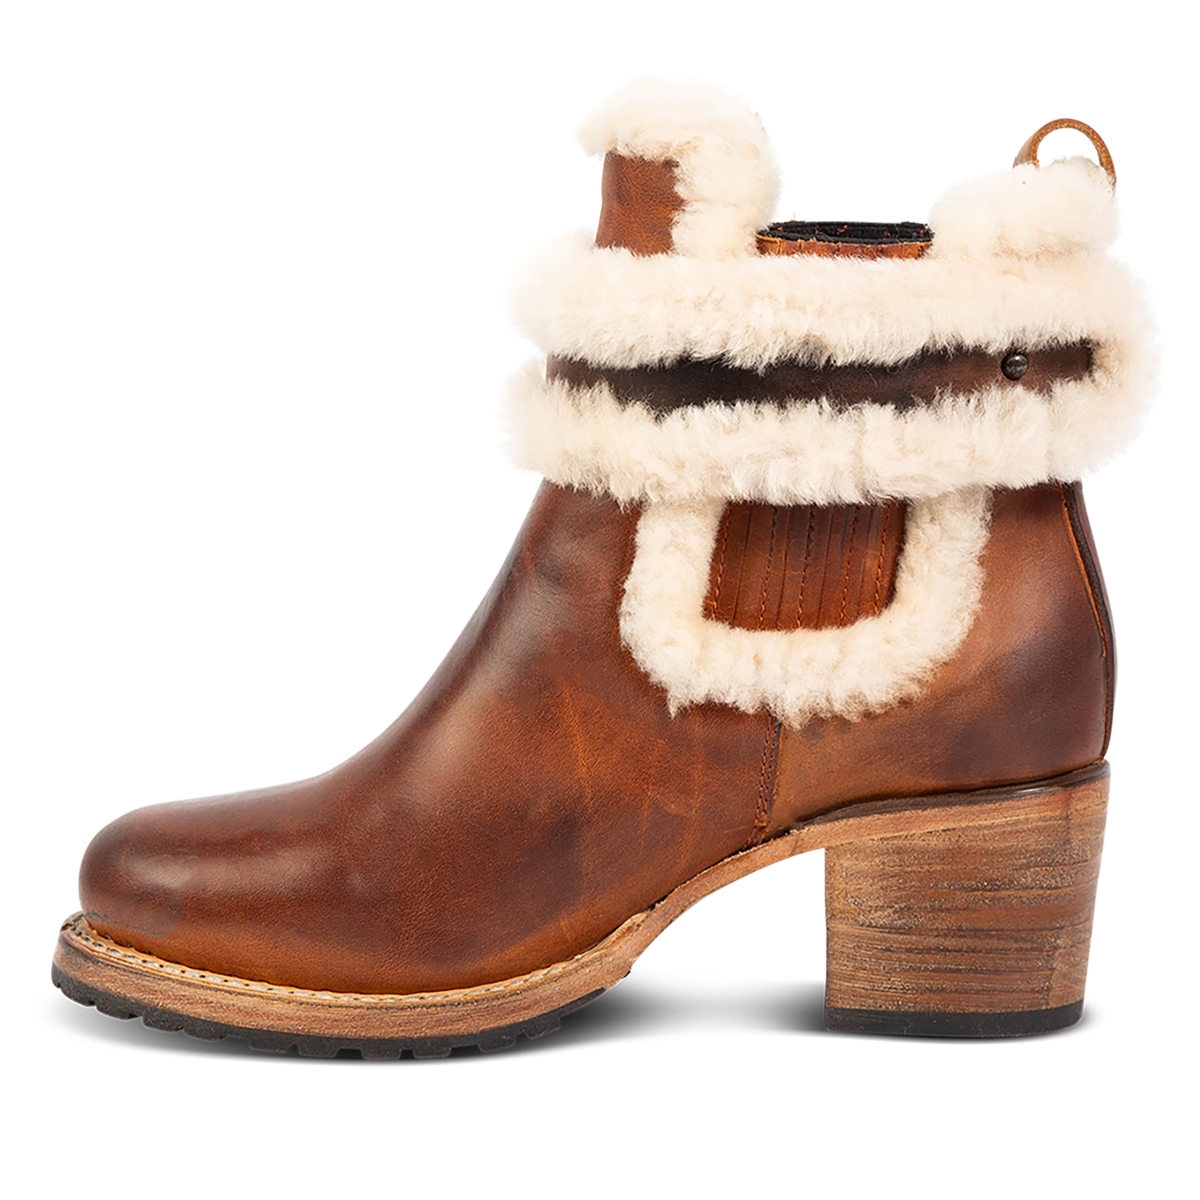 Inside view showing genuine shearling lining and a stacked heel on FREEBIRD women's Neverland tan leather bootie